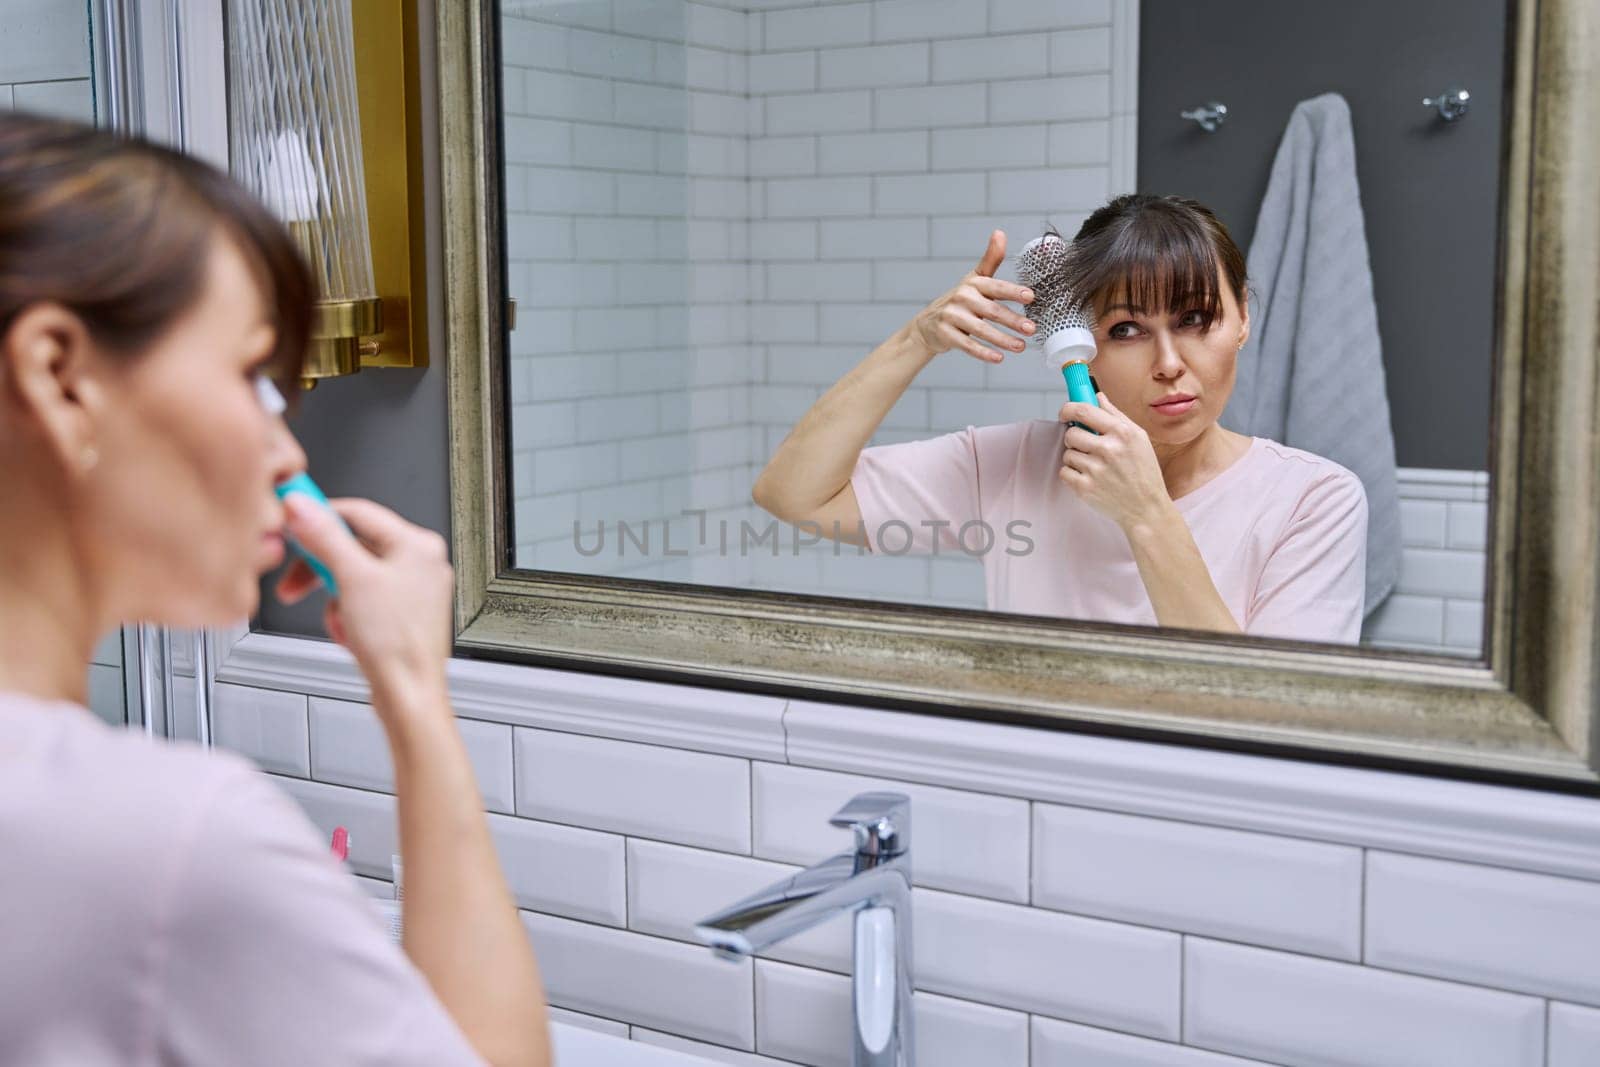 Middle-aged woman with comb looking in mirror, doing hair styling, in bathroom. Beauty, age, cosmetics, hair accessories